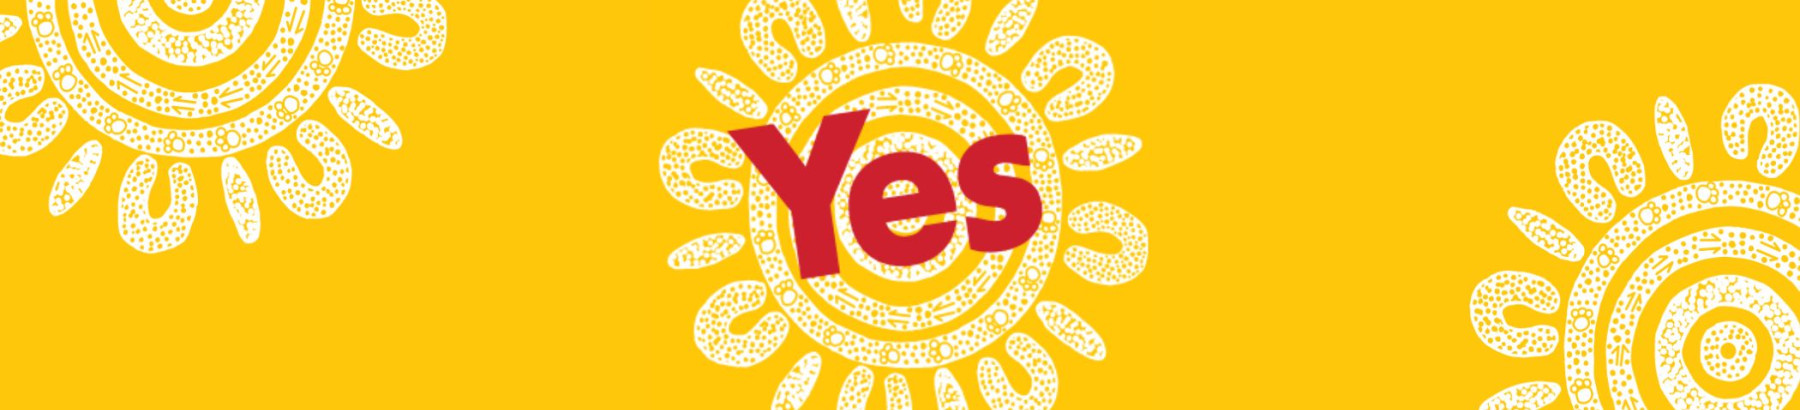 Yes on yellow background with spiral patter